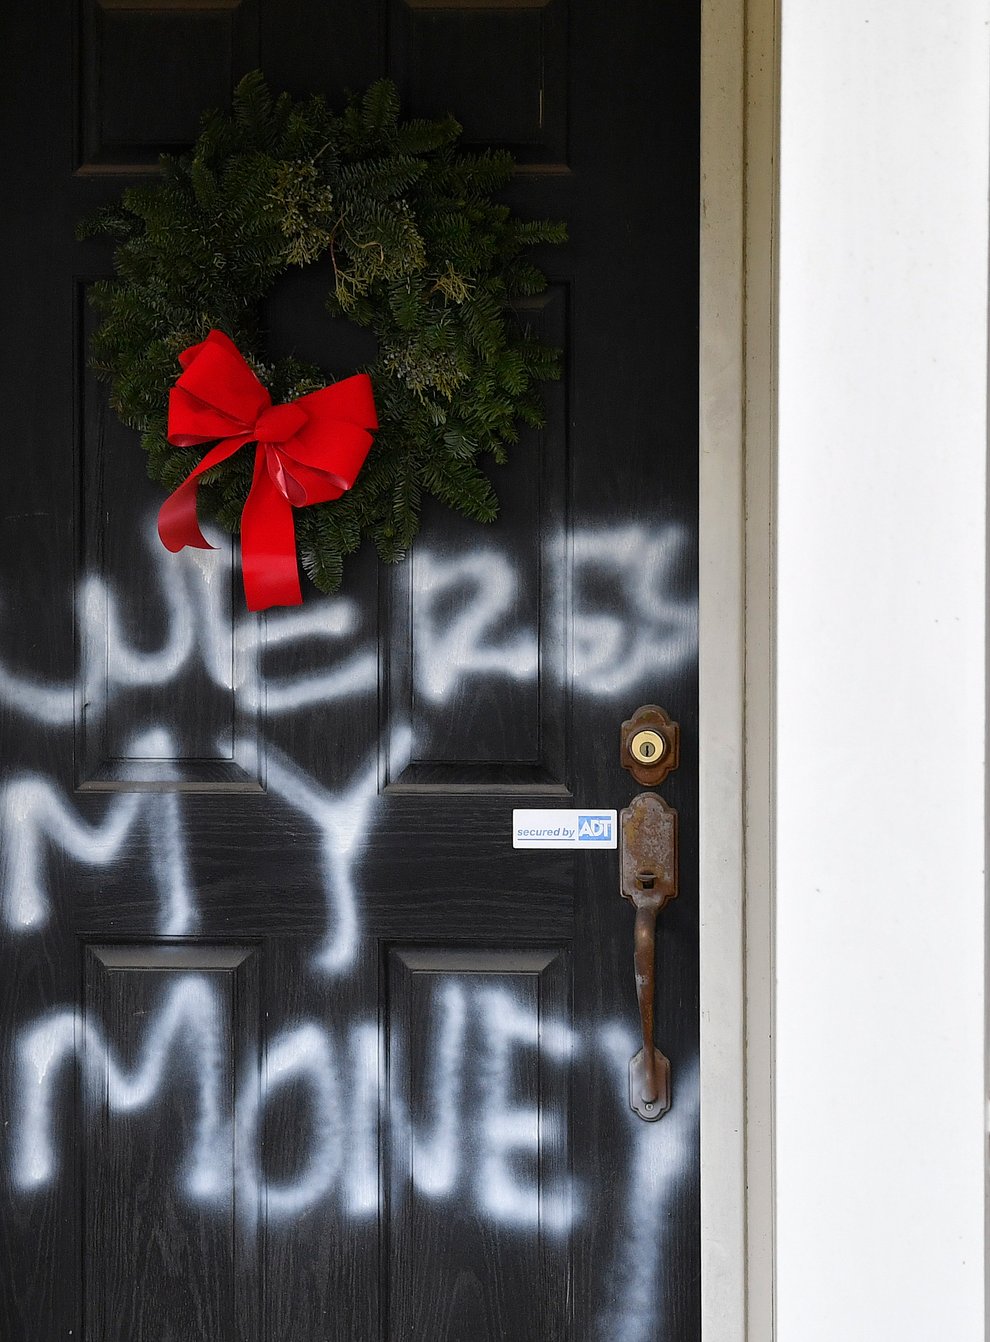 <p>Graffiti at the home of Senate majority leader Mitch McConnell in Louisville, Kentucky (Timothy D Easley/AP)</p>